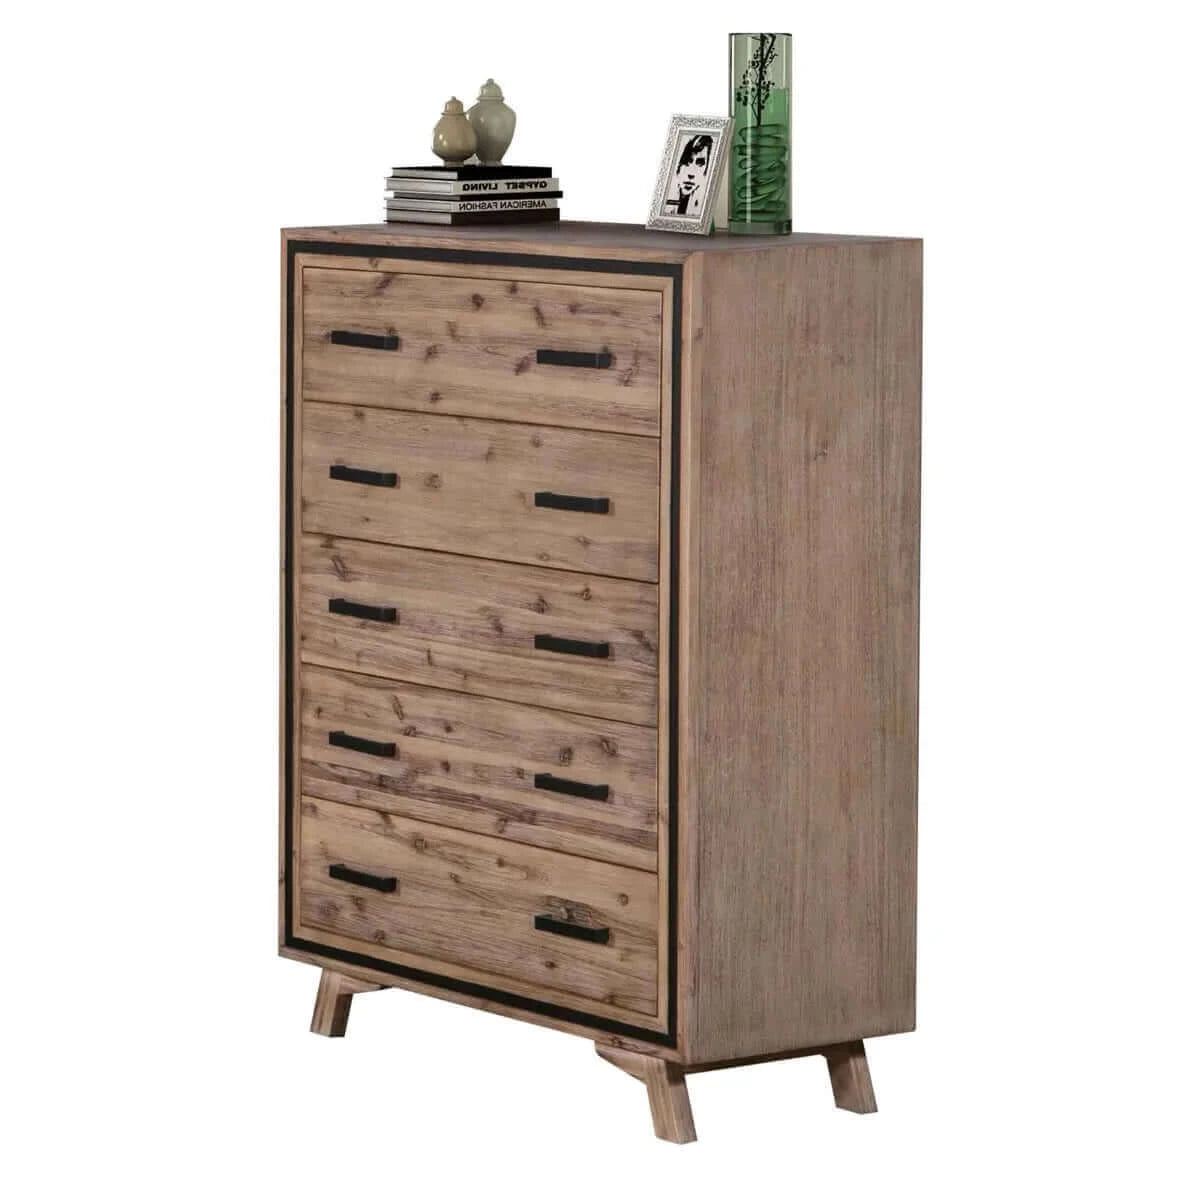 Buy tallboy with 5 storage drawers solid acacia wooden frame in silver brush colour - upinteriors-Upinteriors